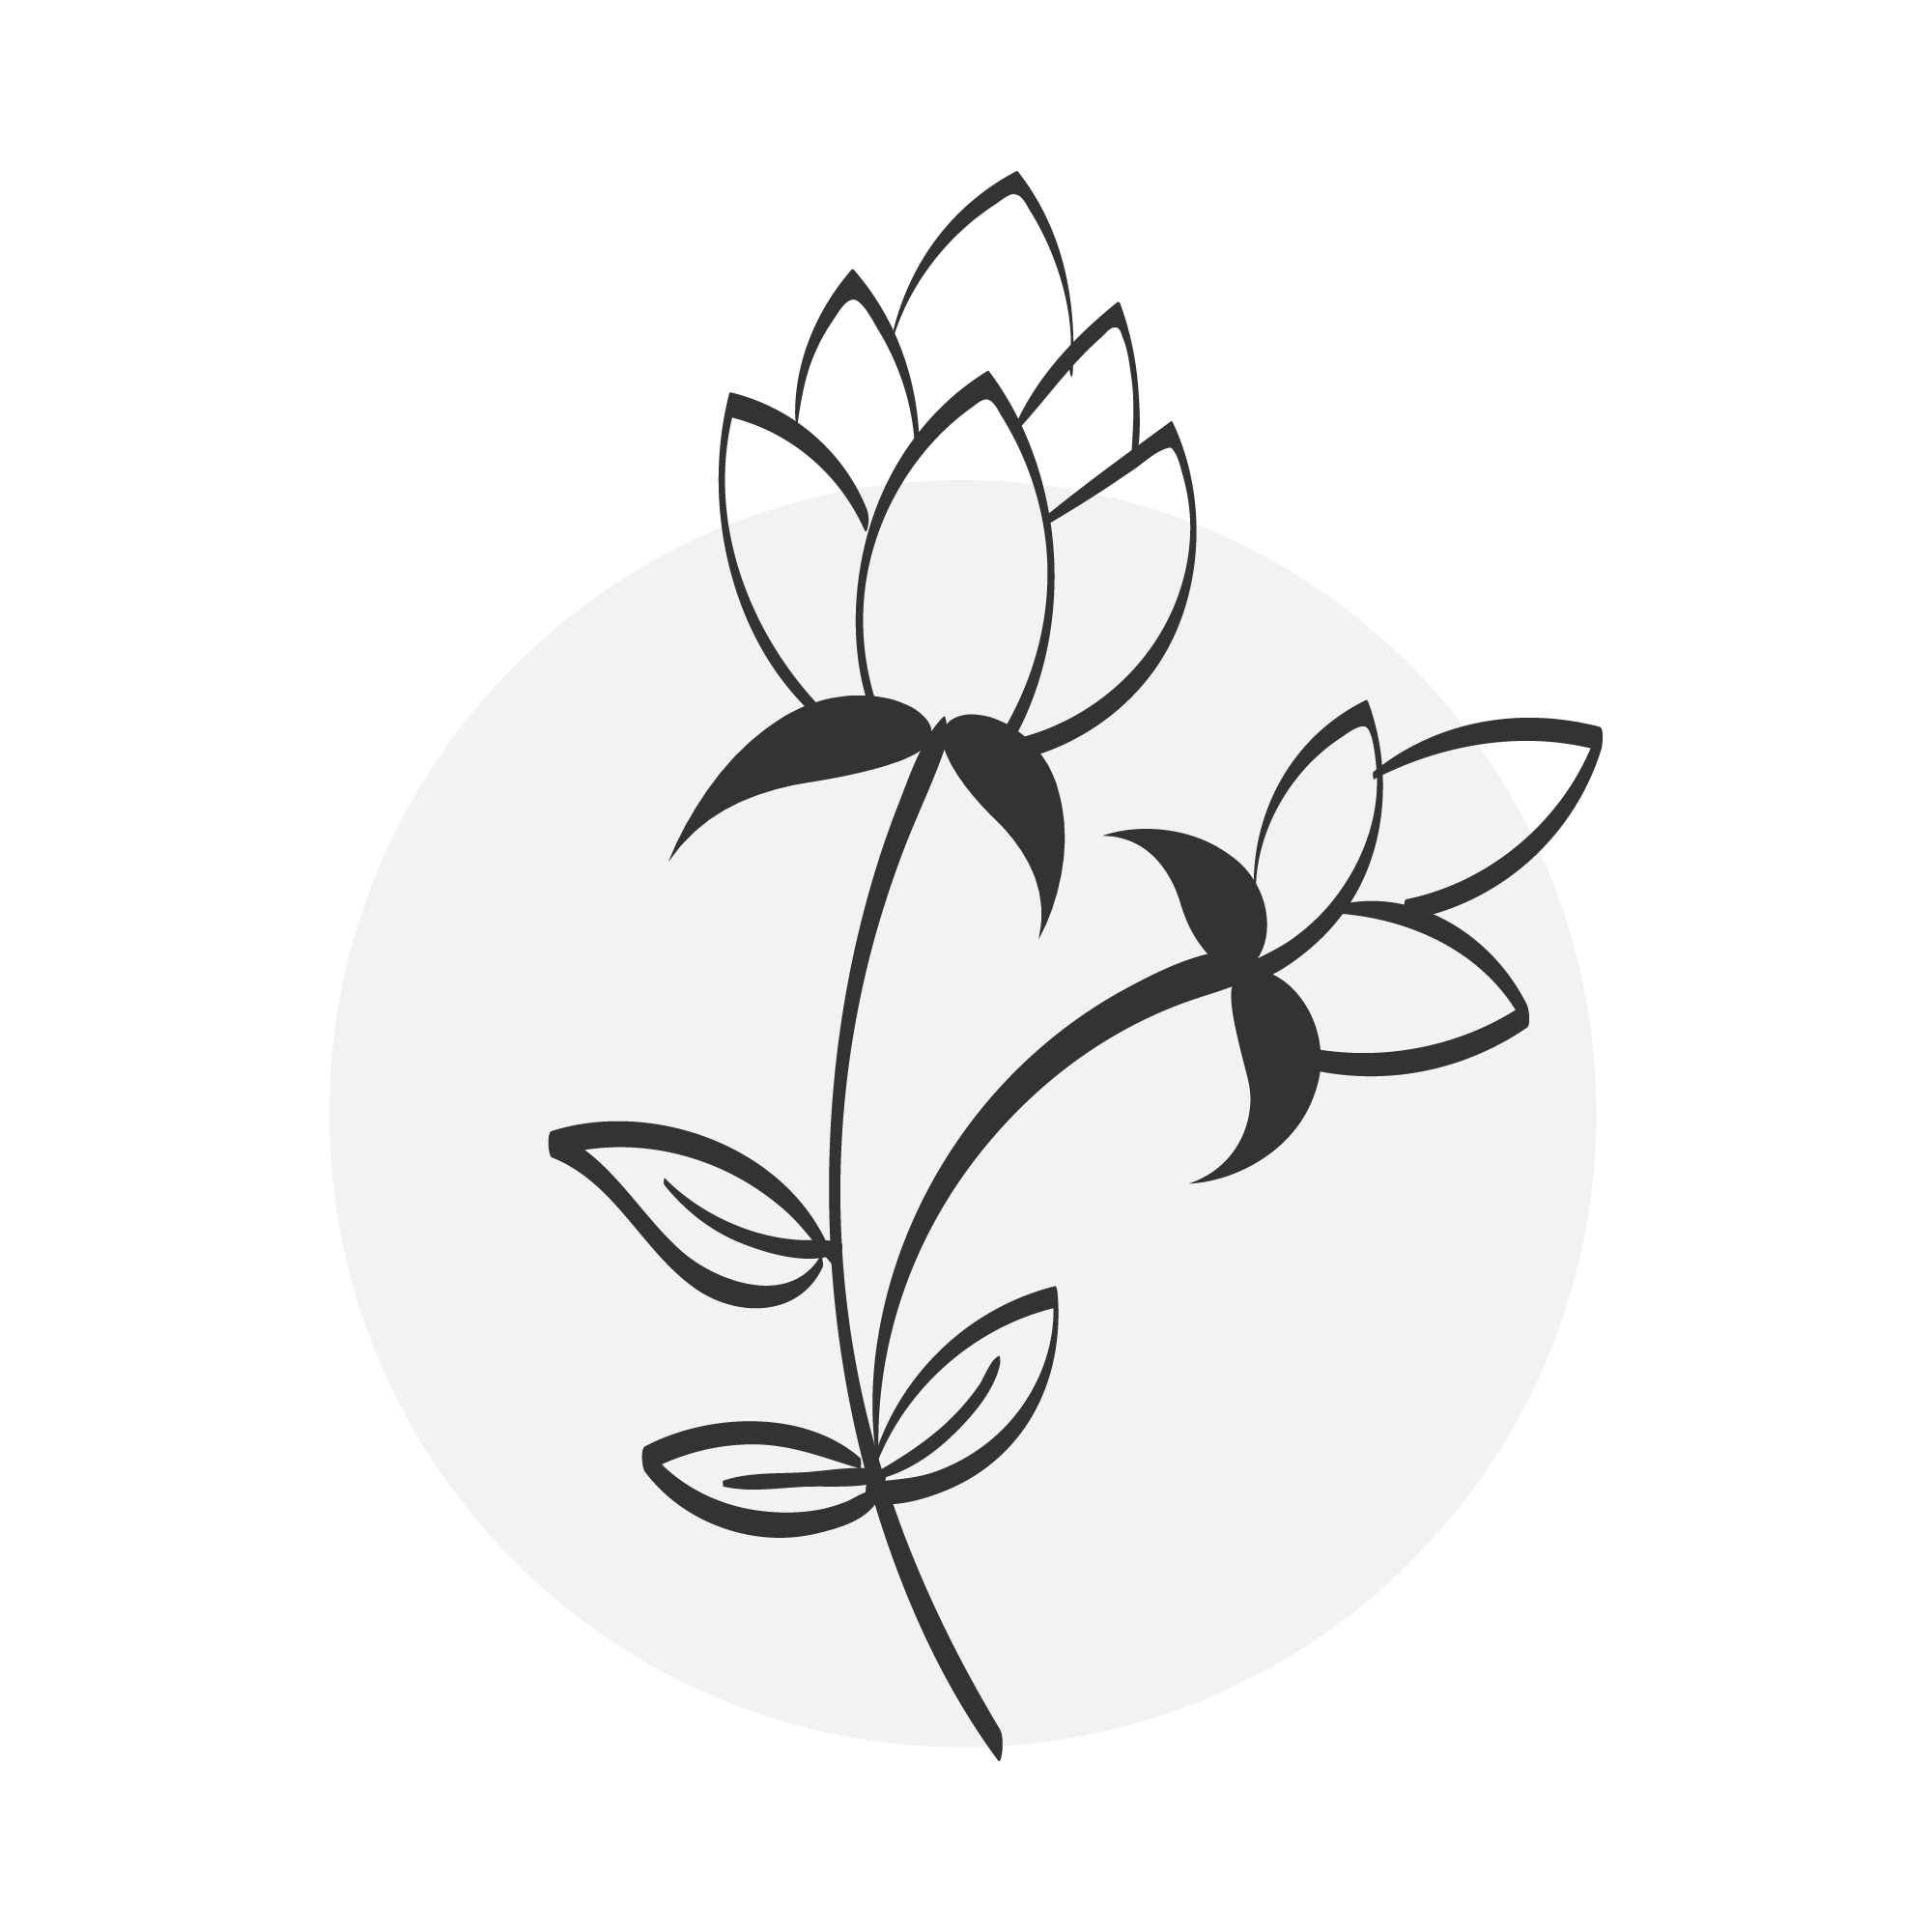 10 Flower Drawing With Line-Art for logos design.